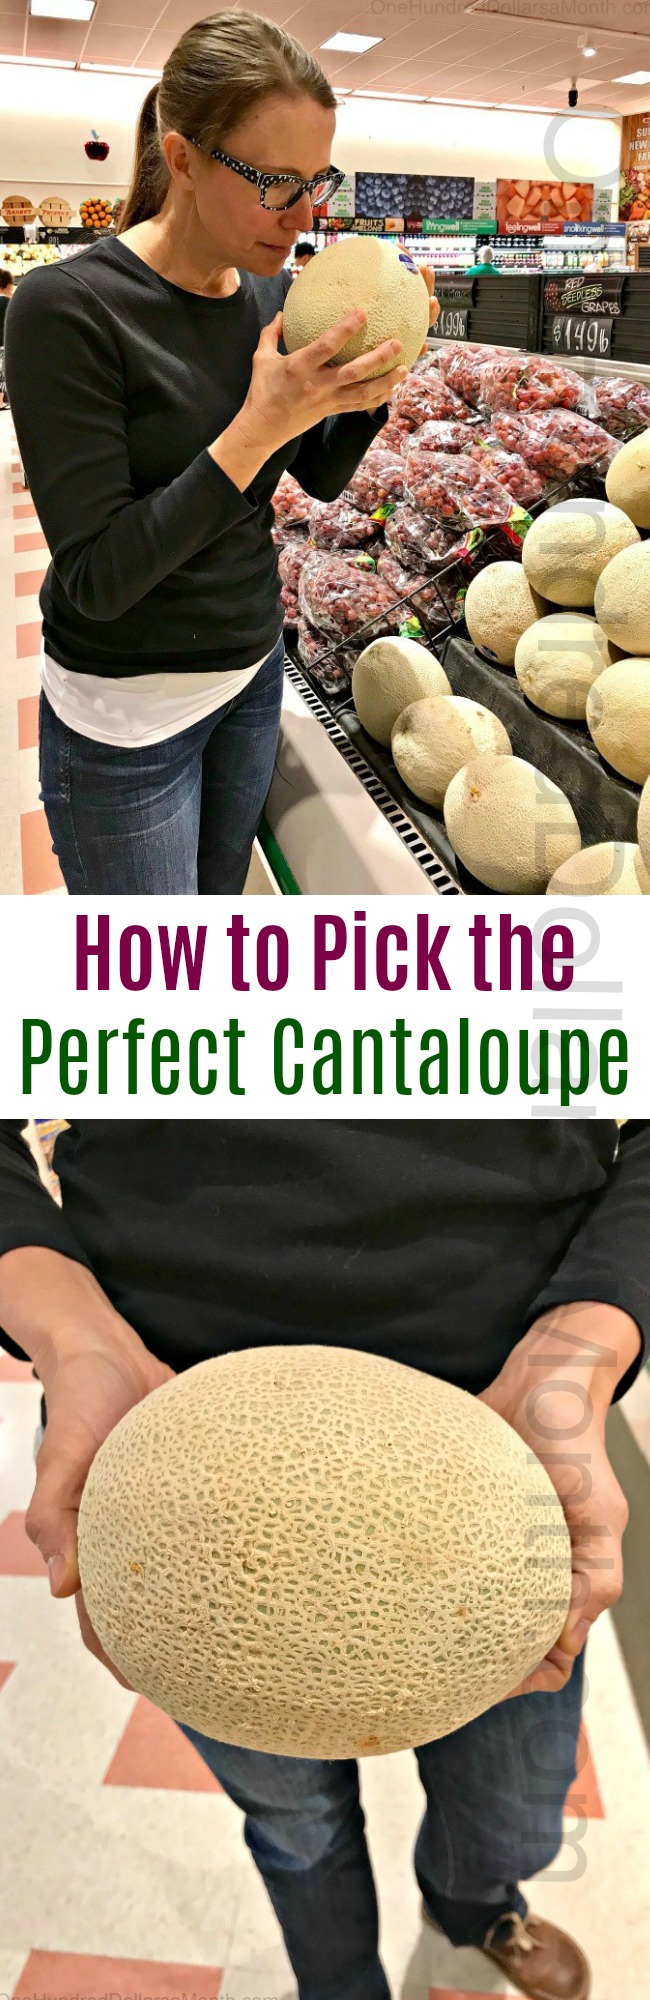 How to Pick the Perfect Cantaloupe